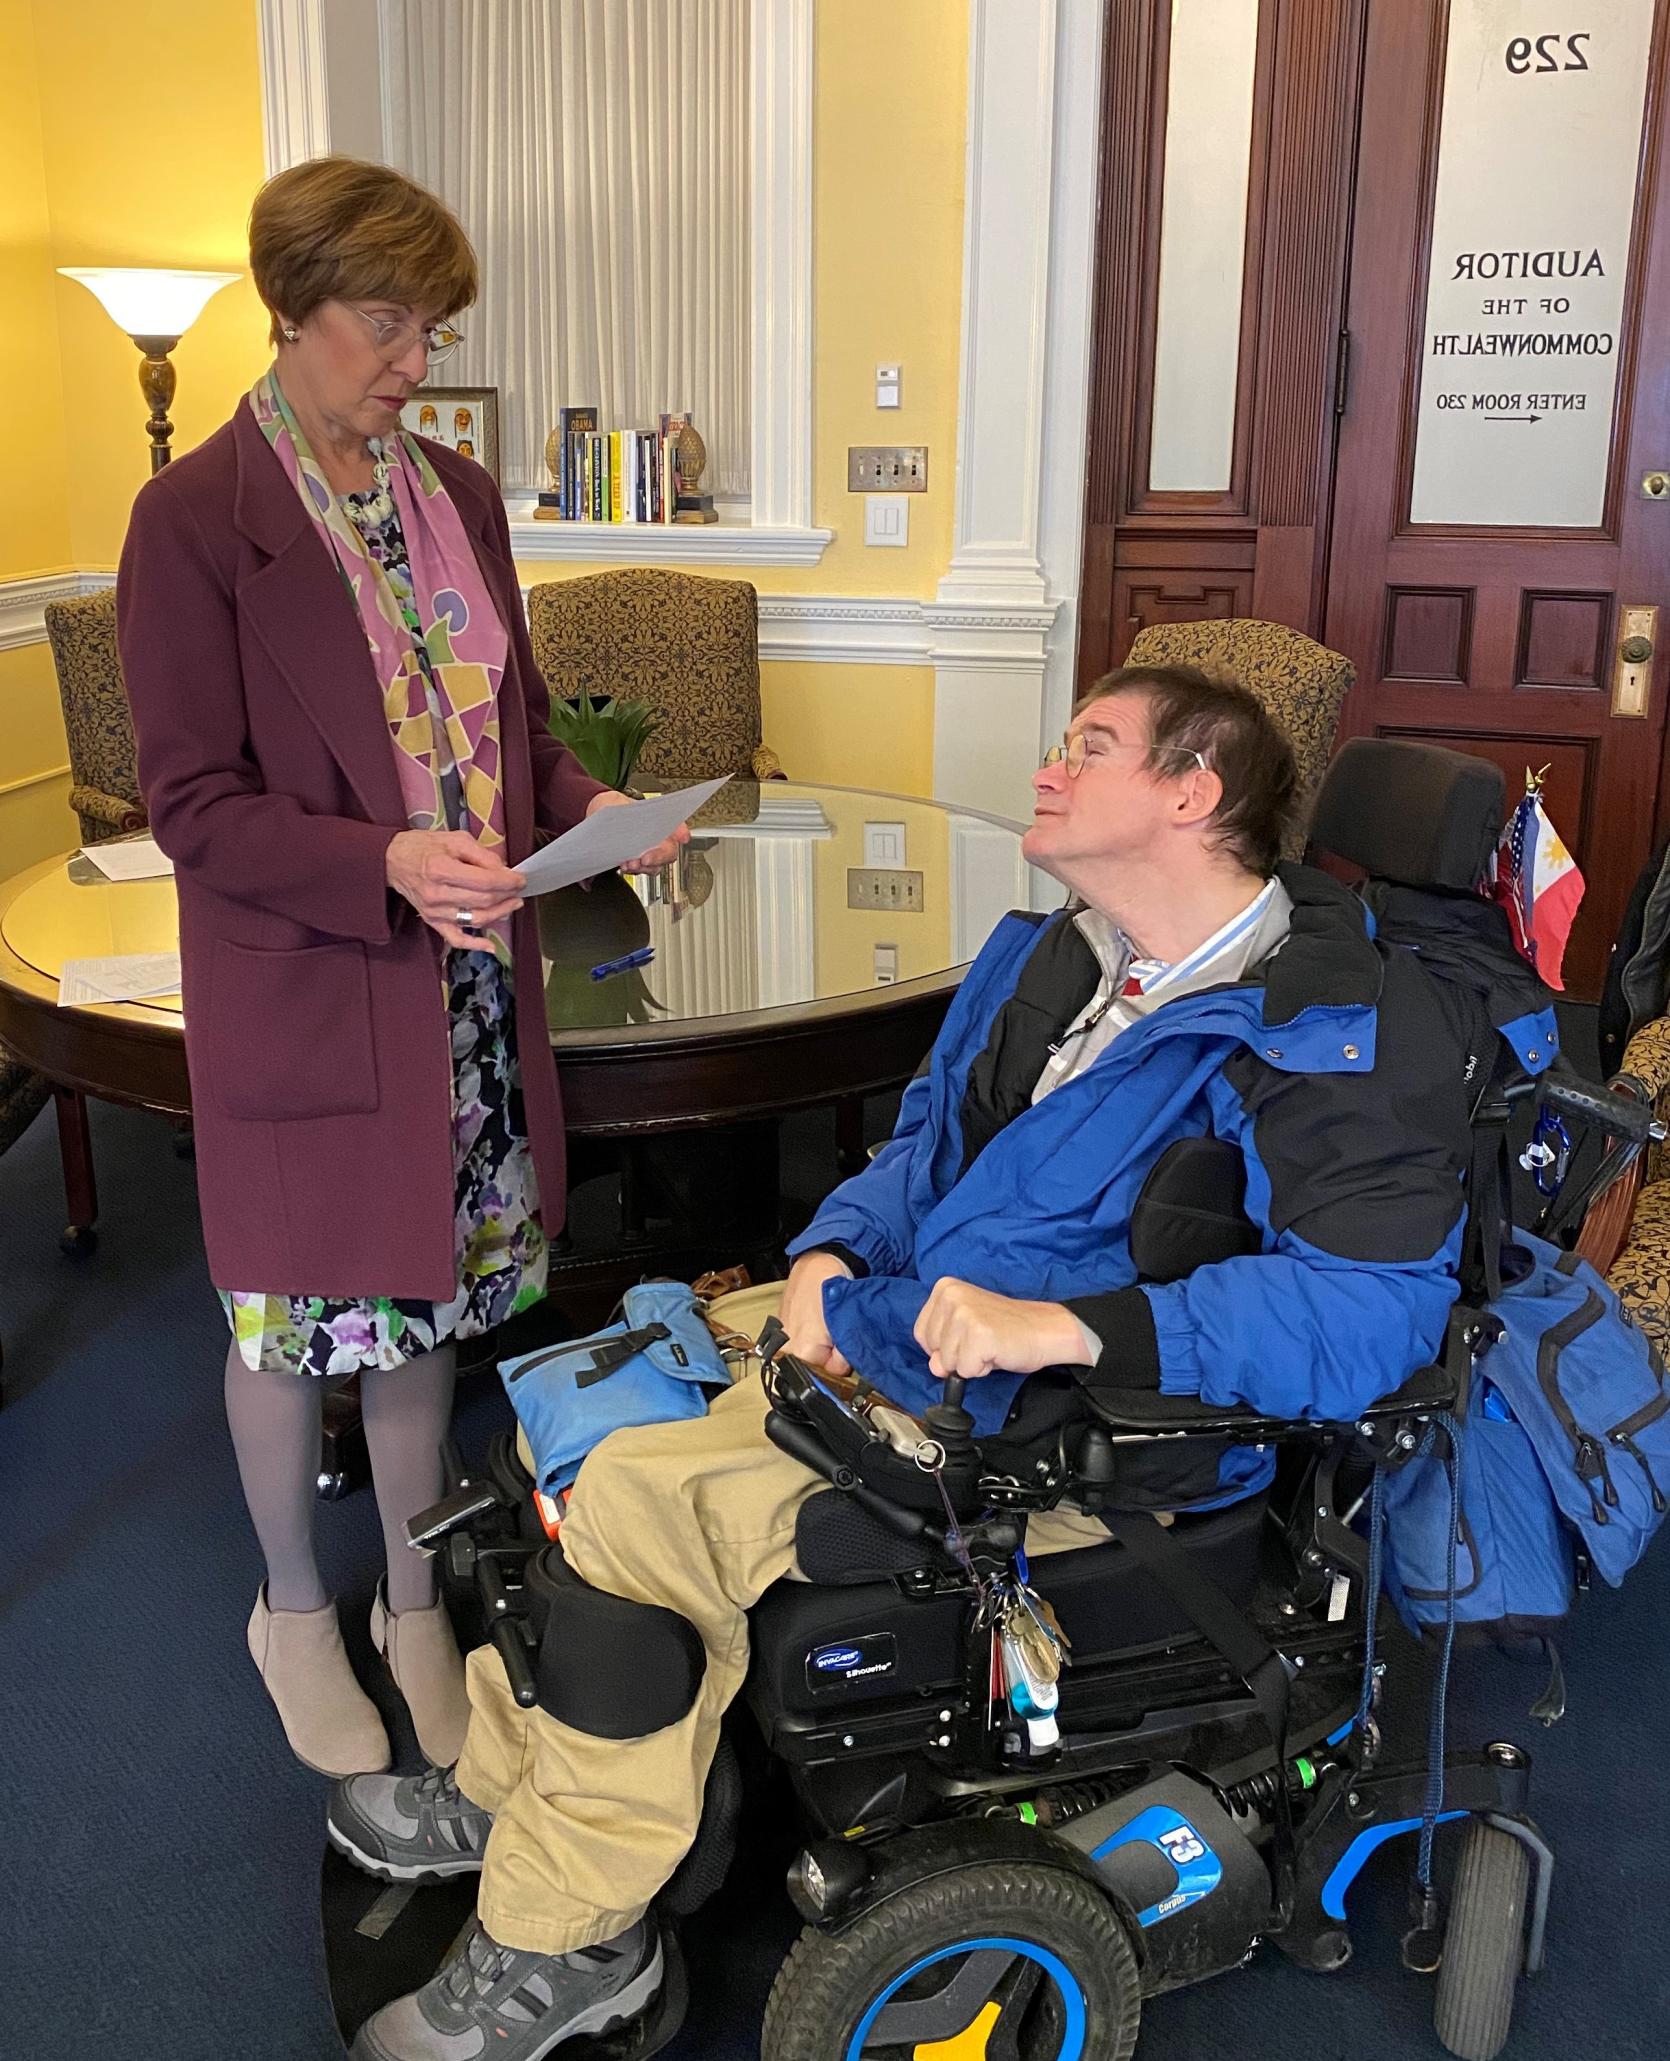 State Auditor Suzanne M. Bump recently appointed Brookline resident Tim Kunzier to the Personal Care Attendant Workforce Council.